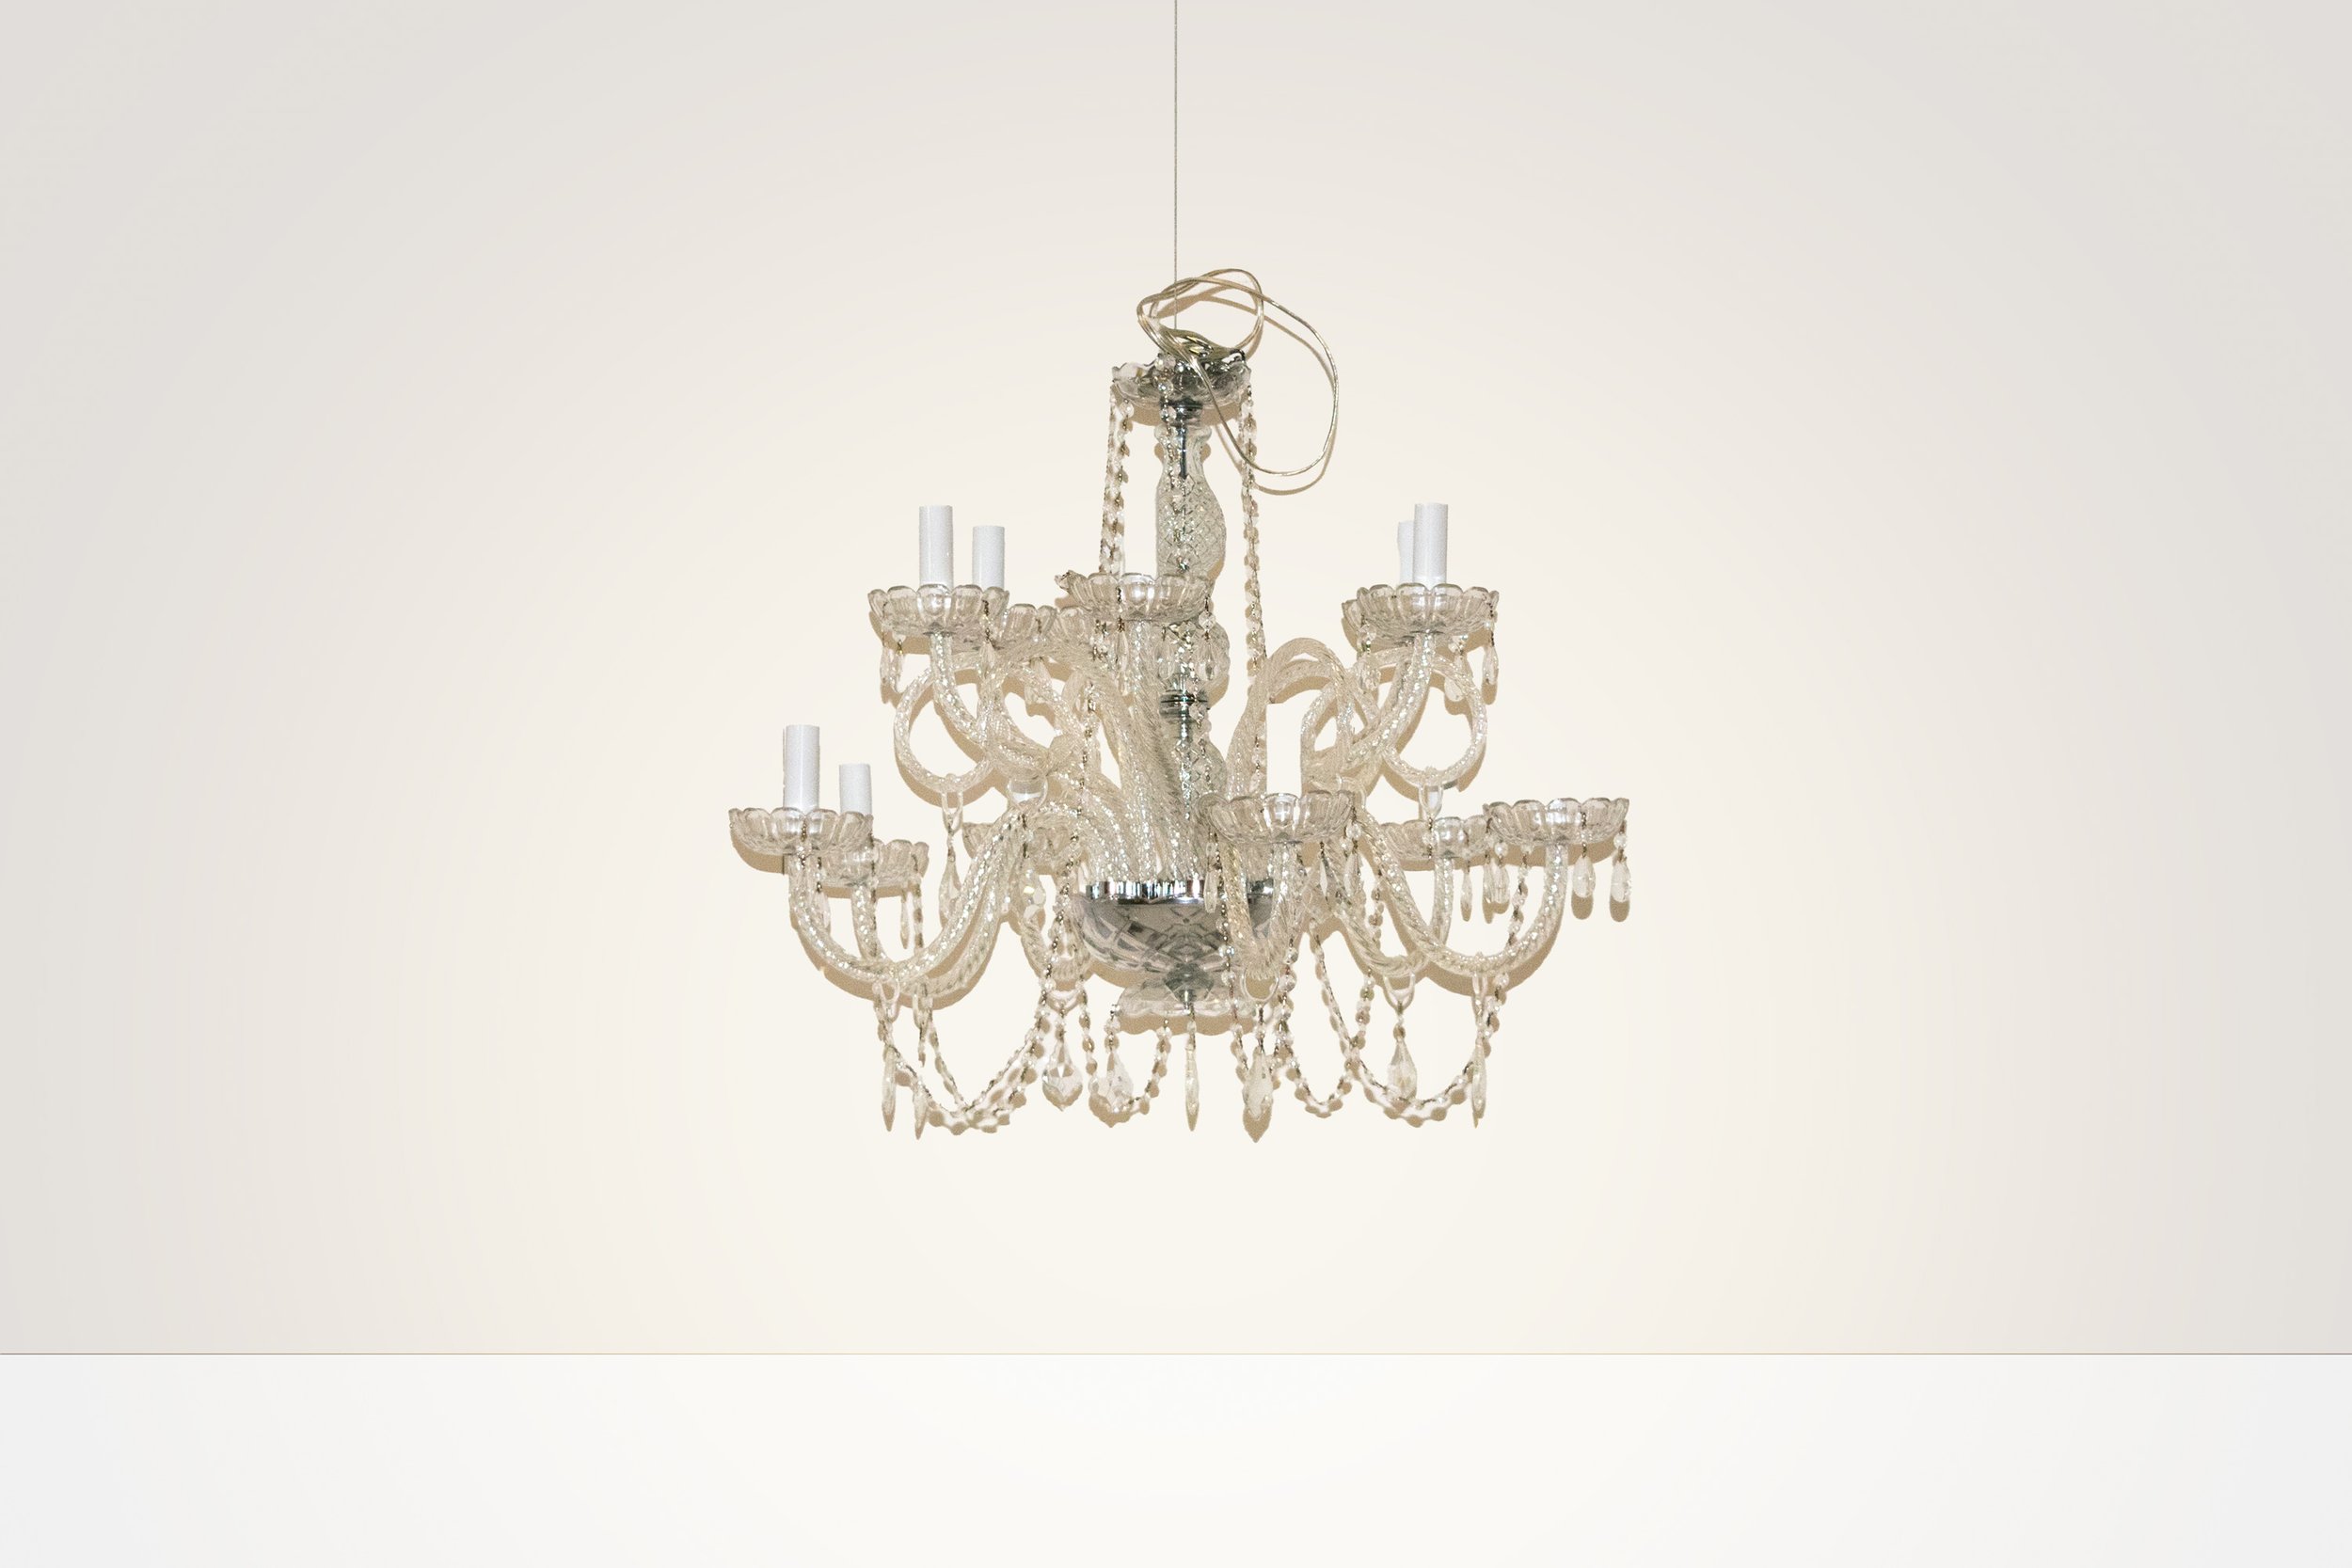 The 3' Crystal Chandelier